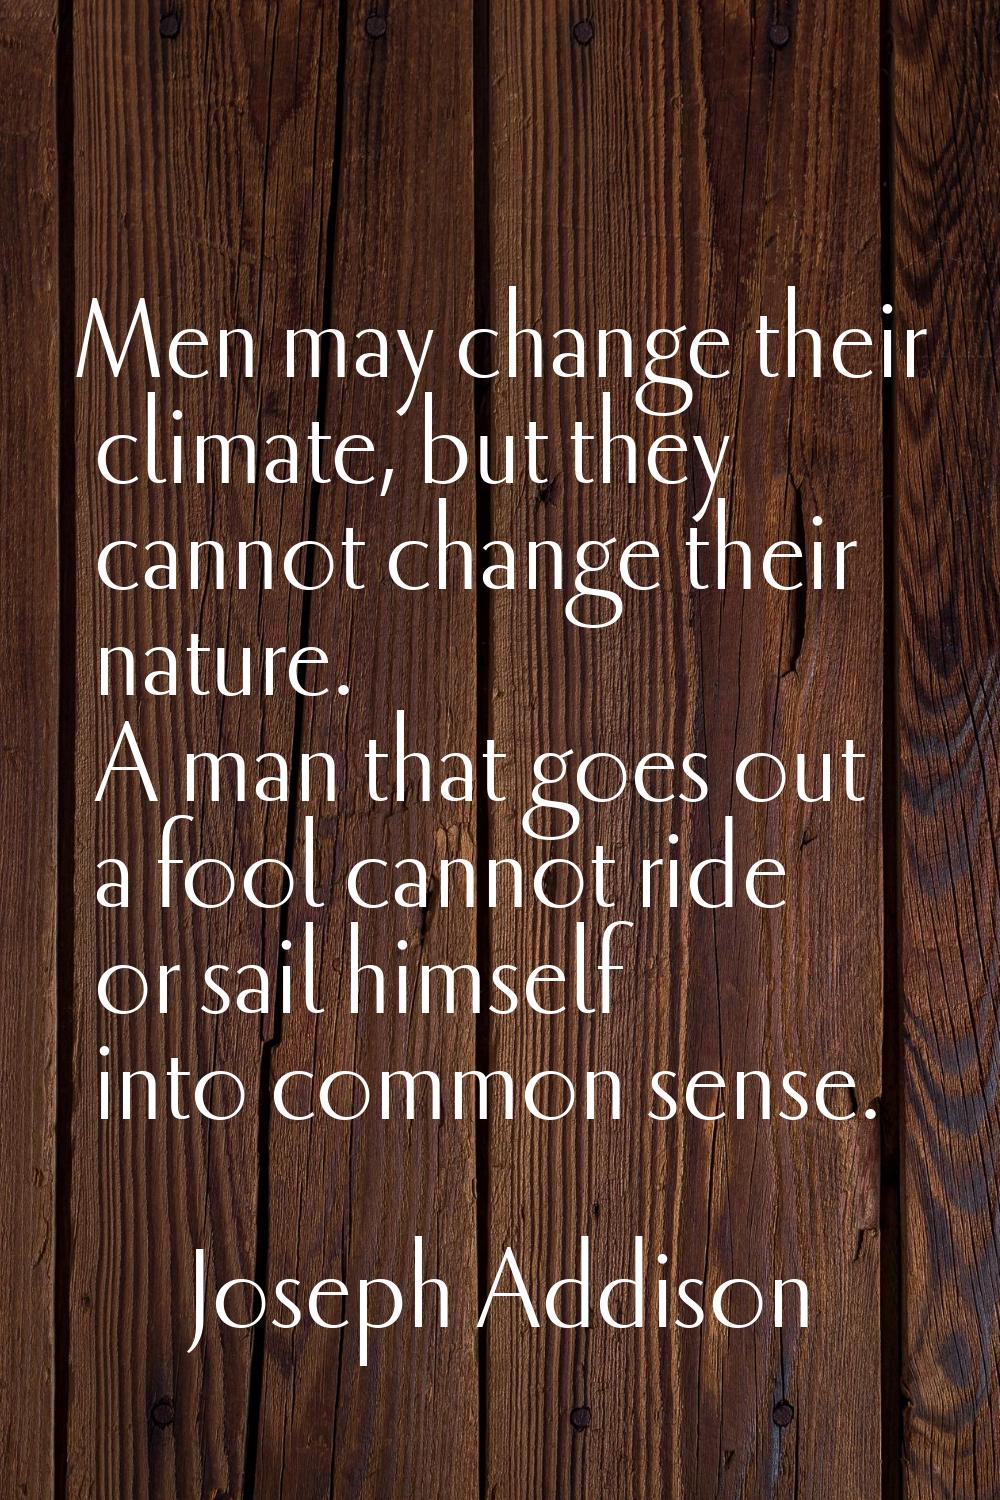 Men may change their climate, but they cannot change their nature. A man that goes out a fool canno